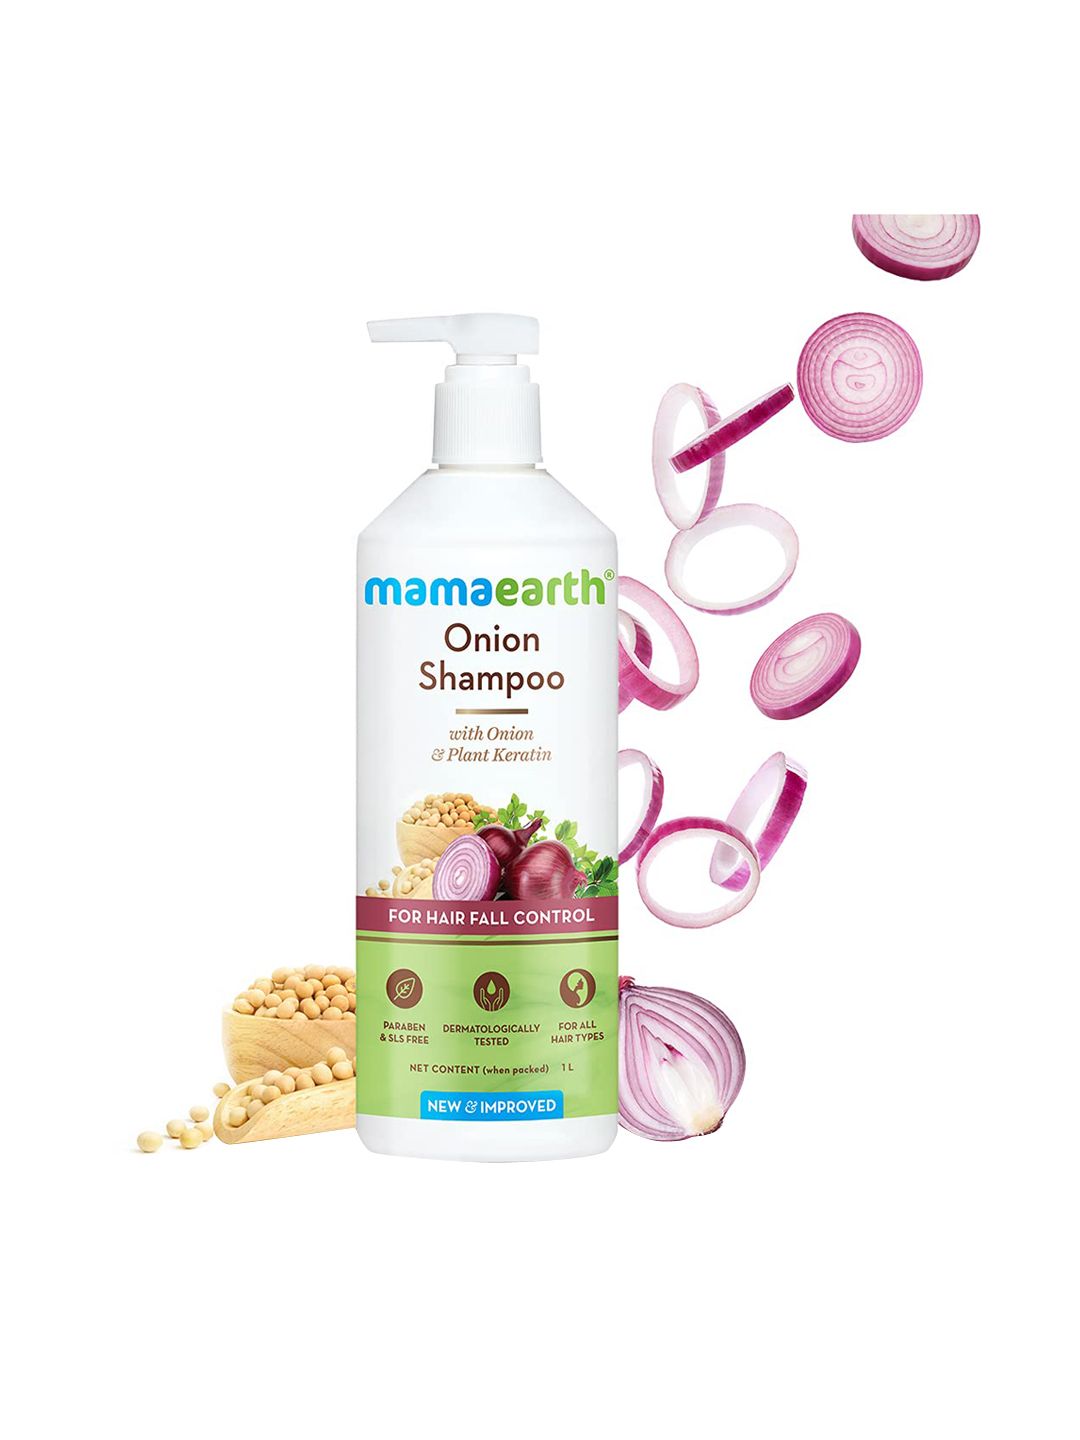 Mamaearth Onion Shampoo for Hair Growth & Hair Fall Control - Onion & Plant Keratin - 1 L Price in India